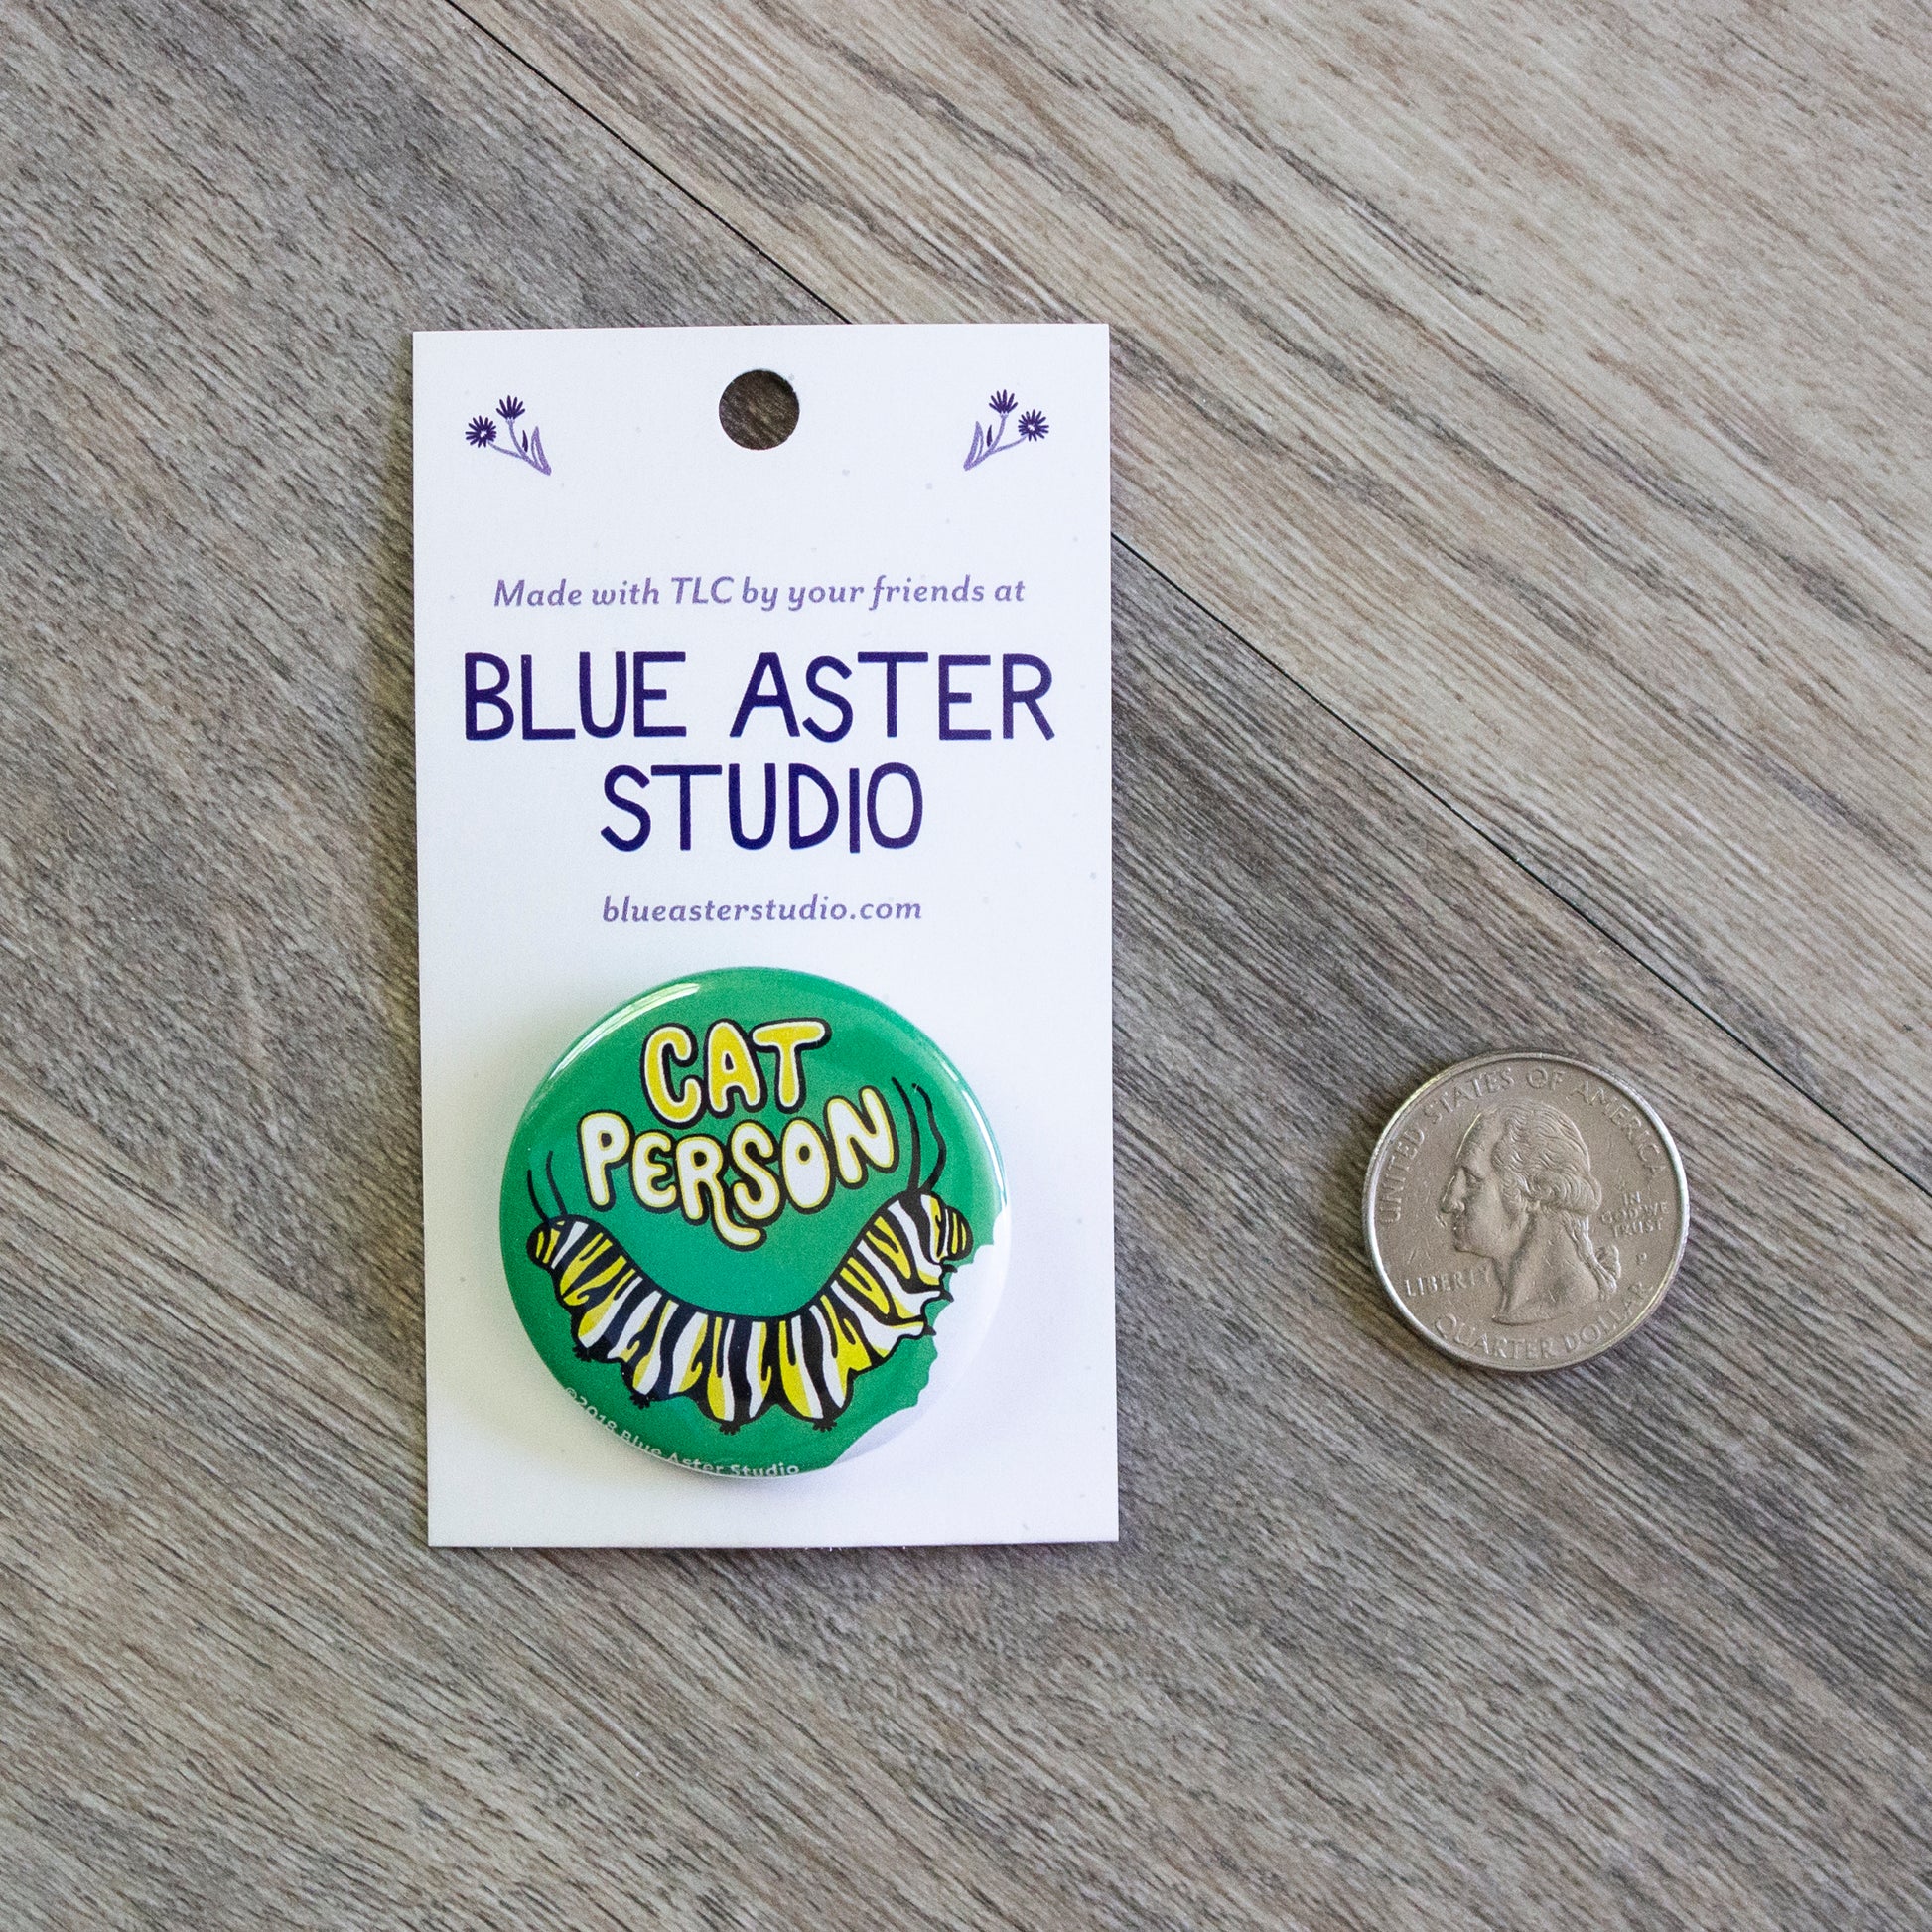 A 1.5 inch green pinback button with an illustration of a monarch caterpillar crawling along the bottom and the words Cat Person above it. A USD quarter is provided for scale.